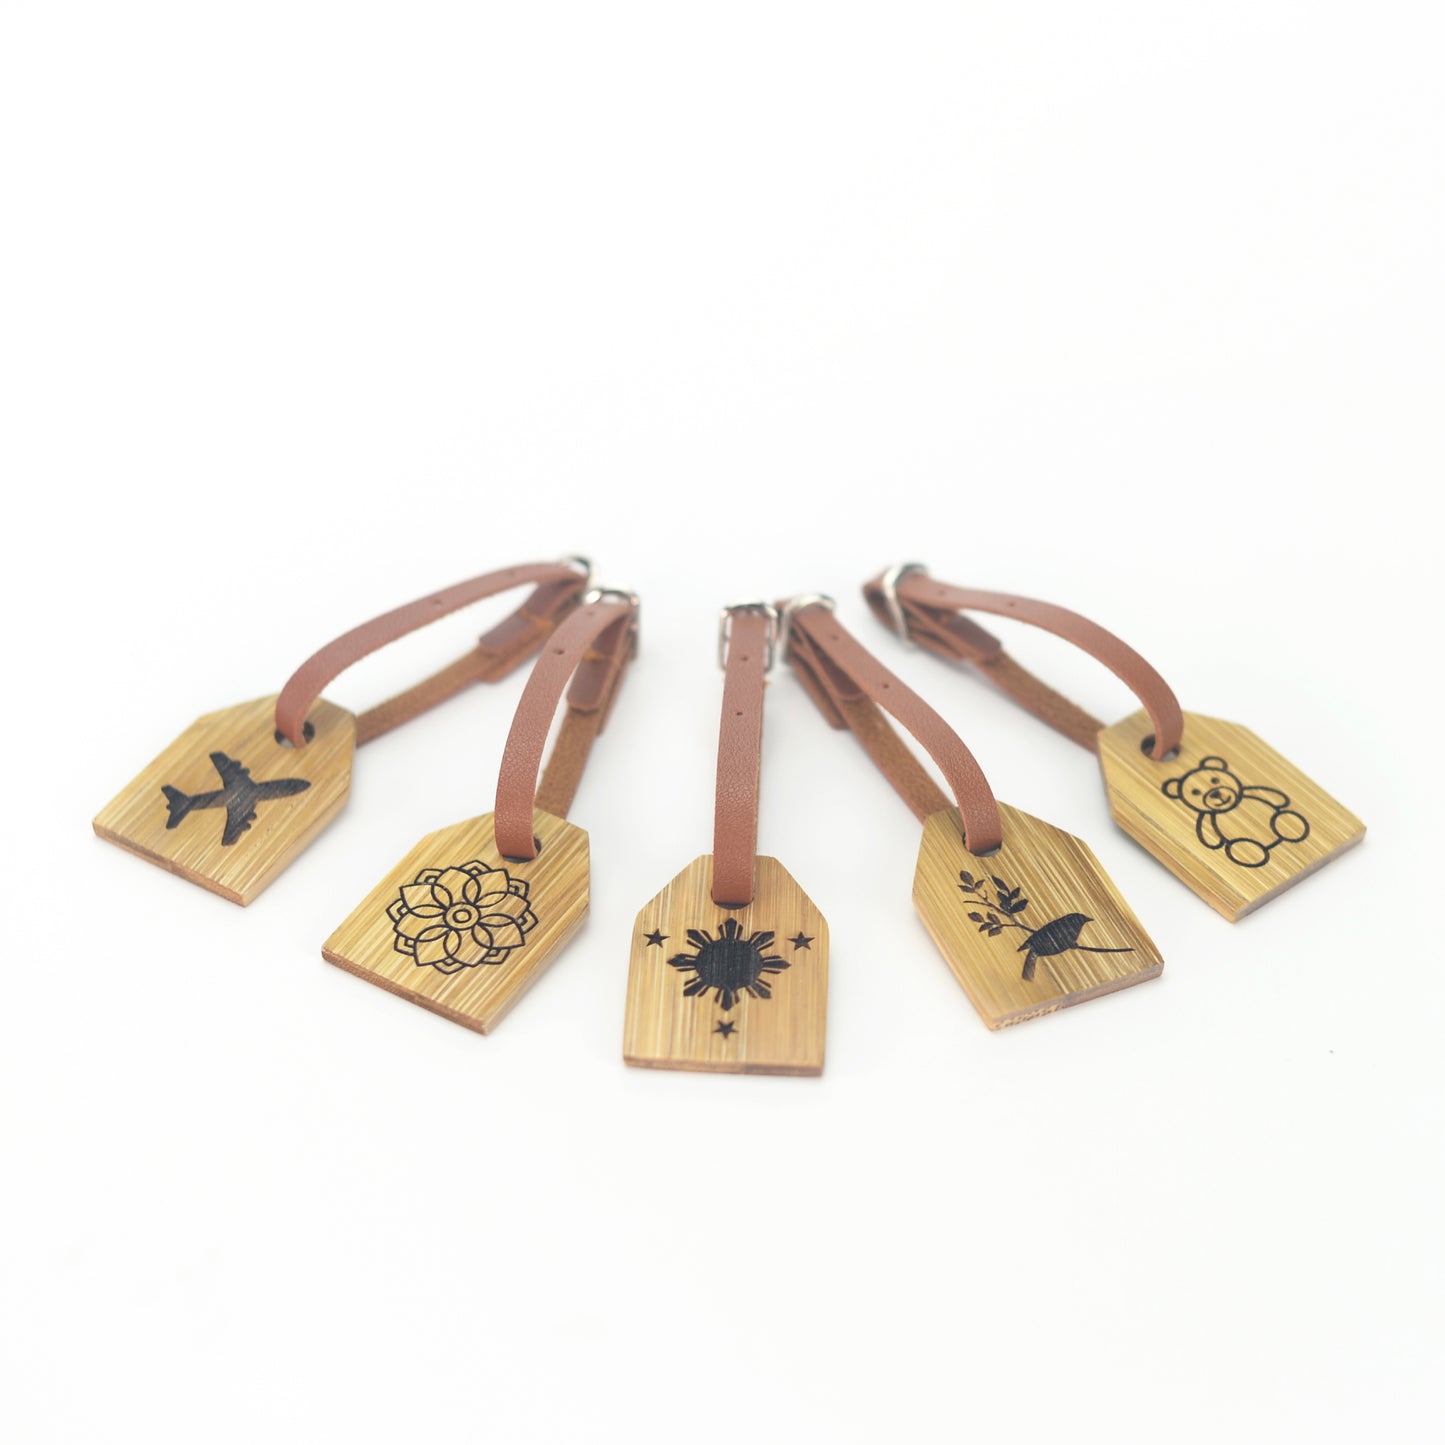 BAG TAGS WITH LEATHER